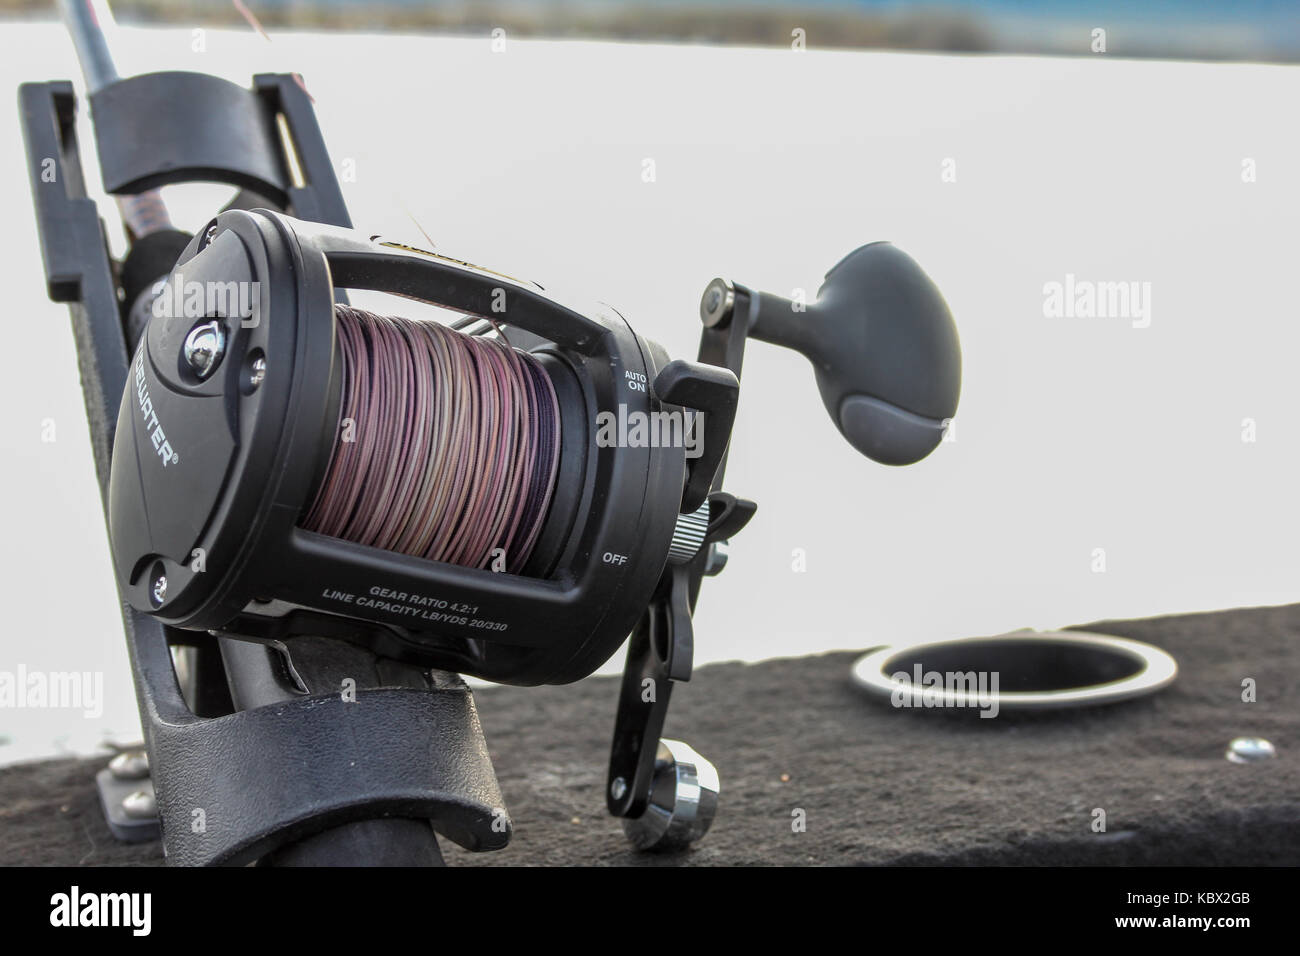 Close up of a fishing rod and reel with lead core fishing line